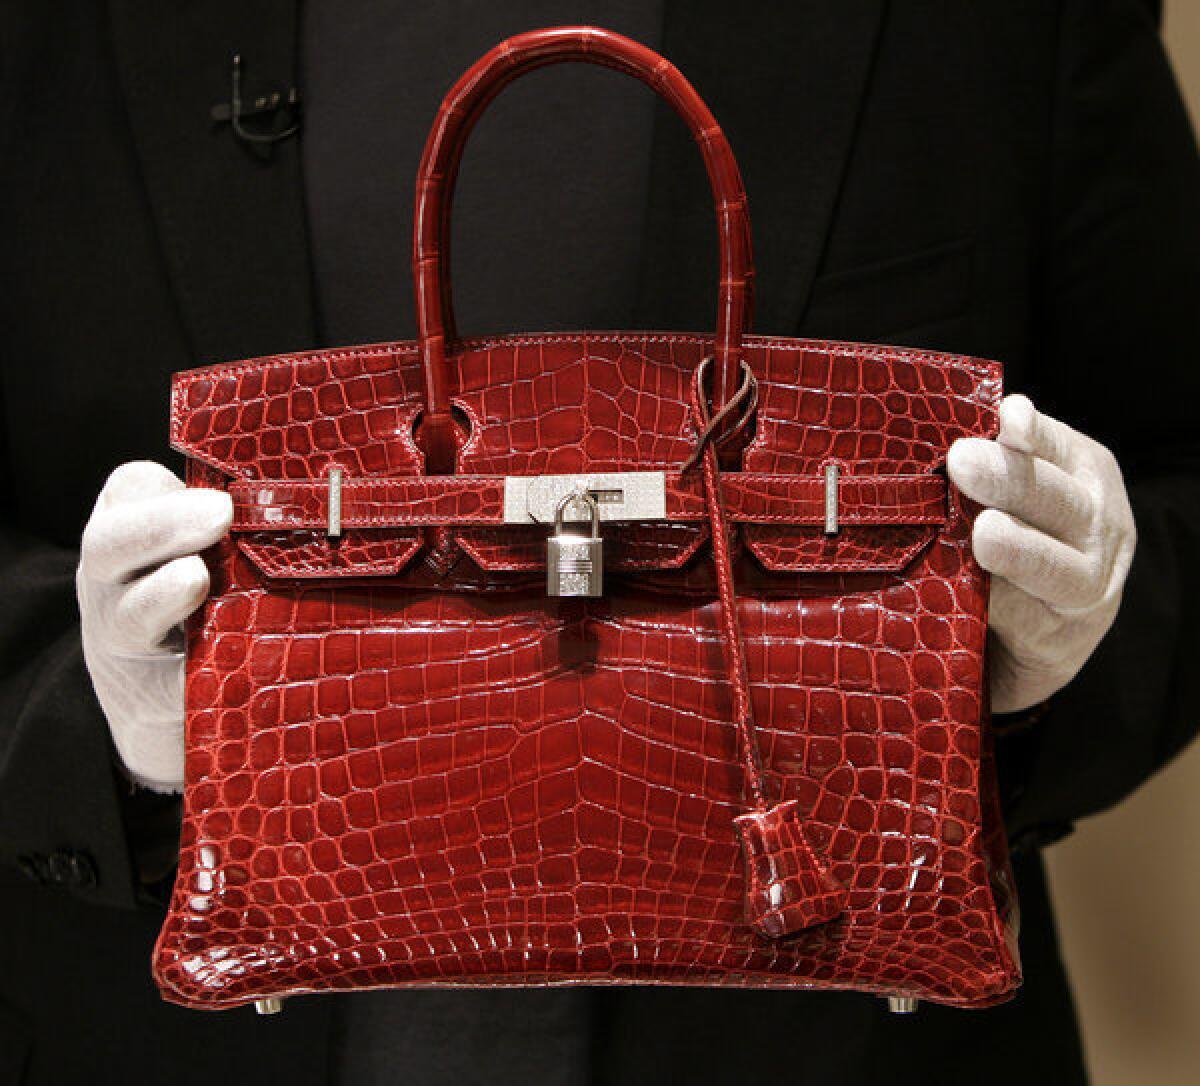 Wealthy consumers will be reining in their spending on discretionary items, such as this Hermes Birkin bag.